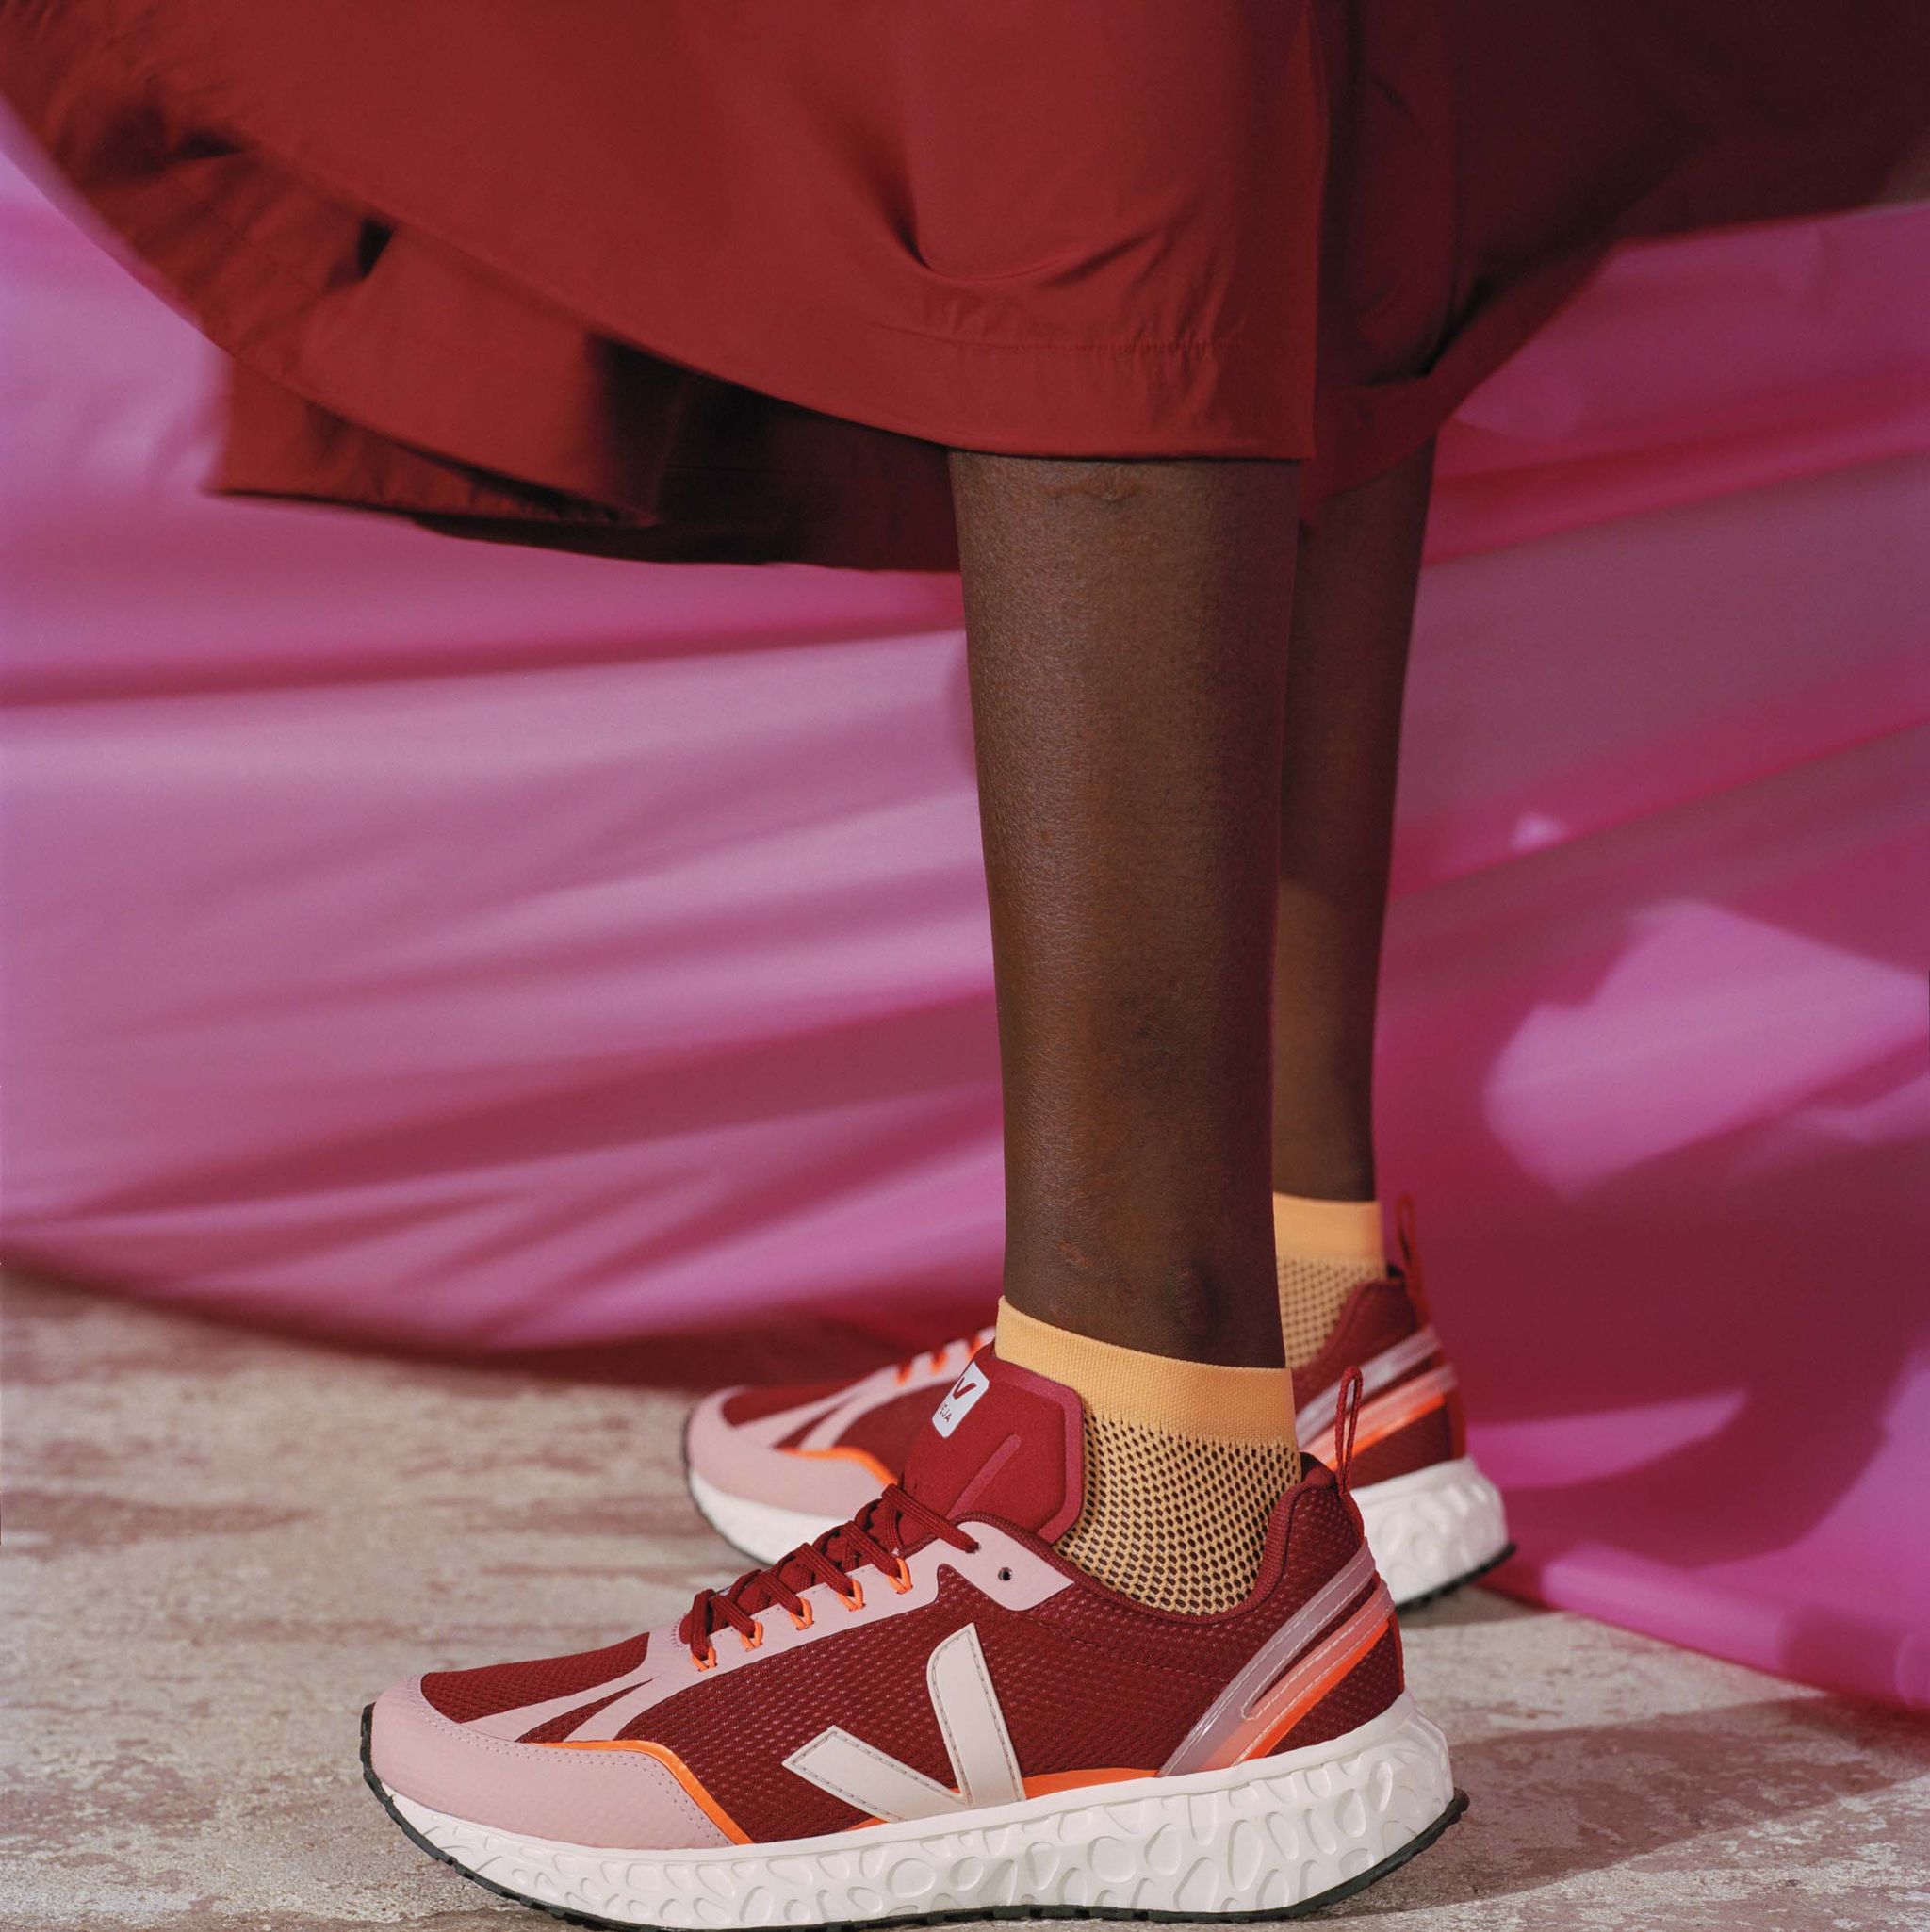 VEJA launch their first environmentally-friendly shoe